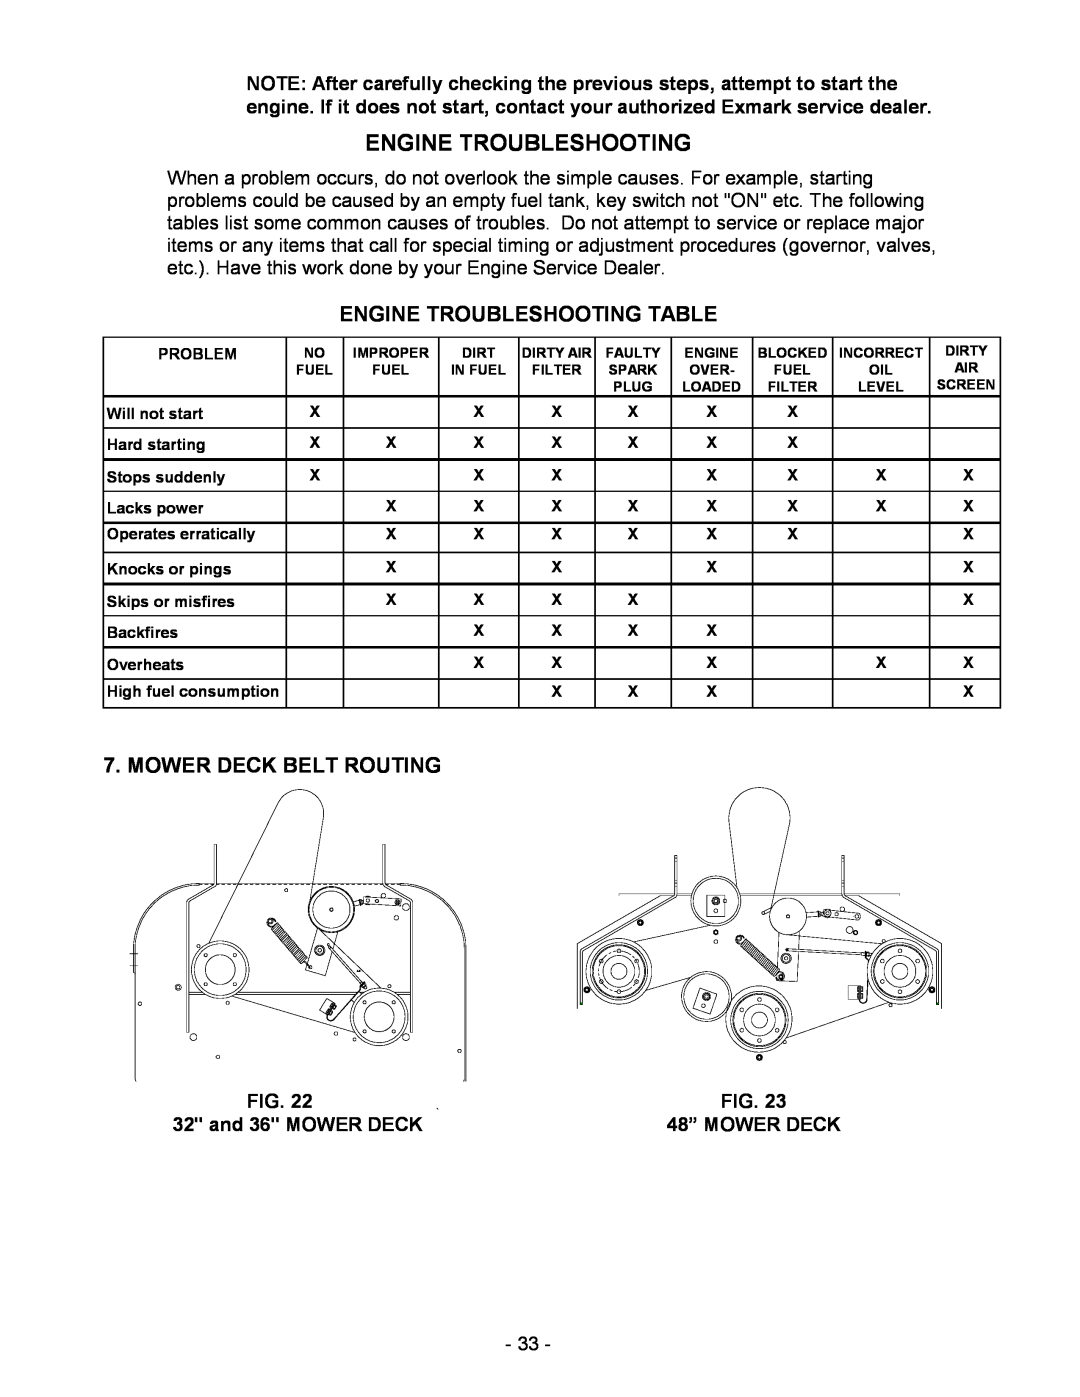 Exmark Metro manual Engine Troubleshooting Table, Mower Deck Belt Routing, and 36 MOWER DECK 